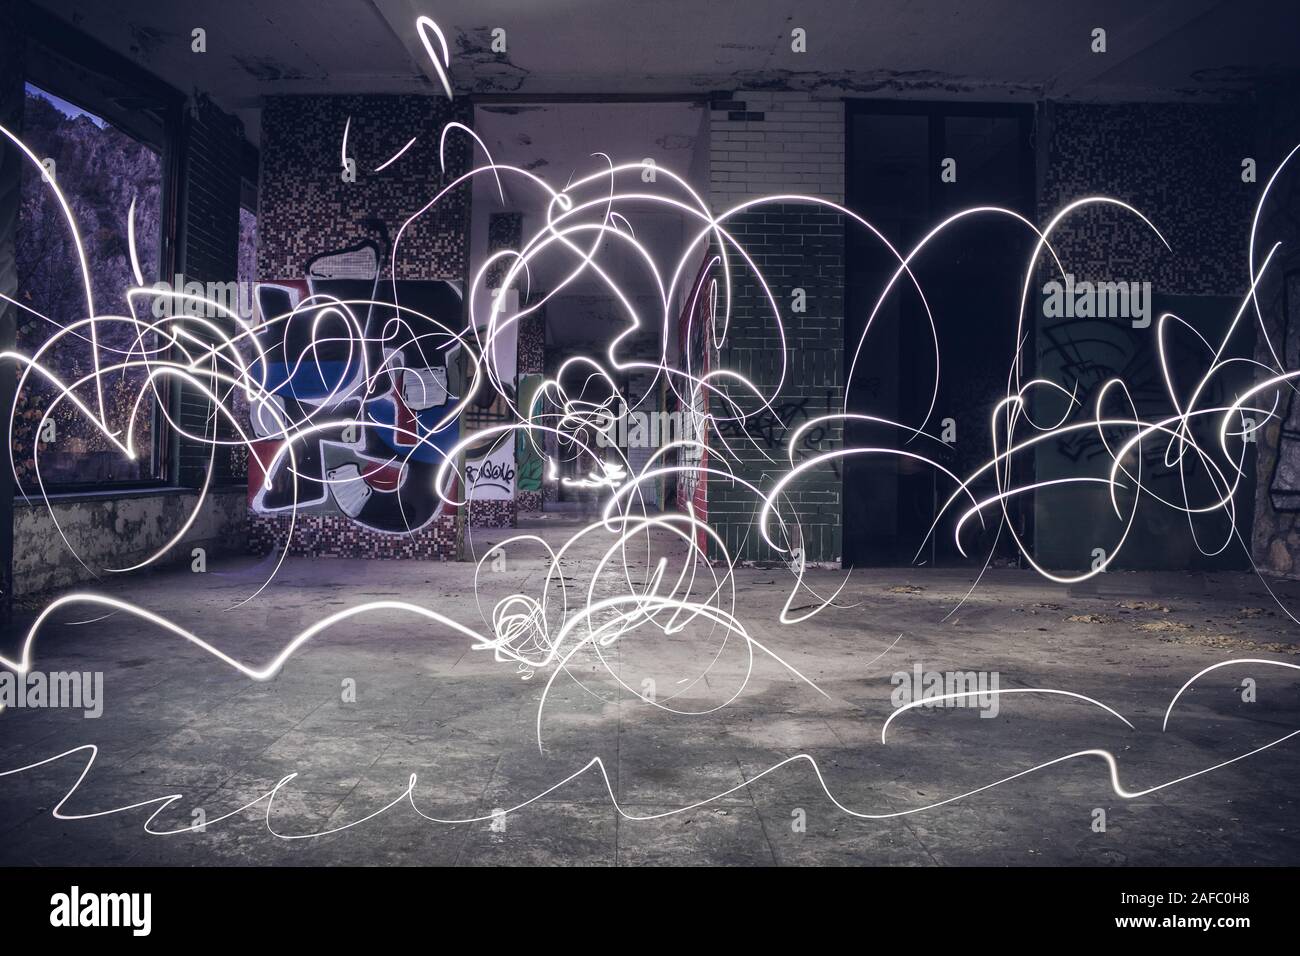 Light painting with smartphone led lamp in abandoned building. Long exposure shot, hectic chaotic light show. Stock Photo